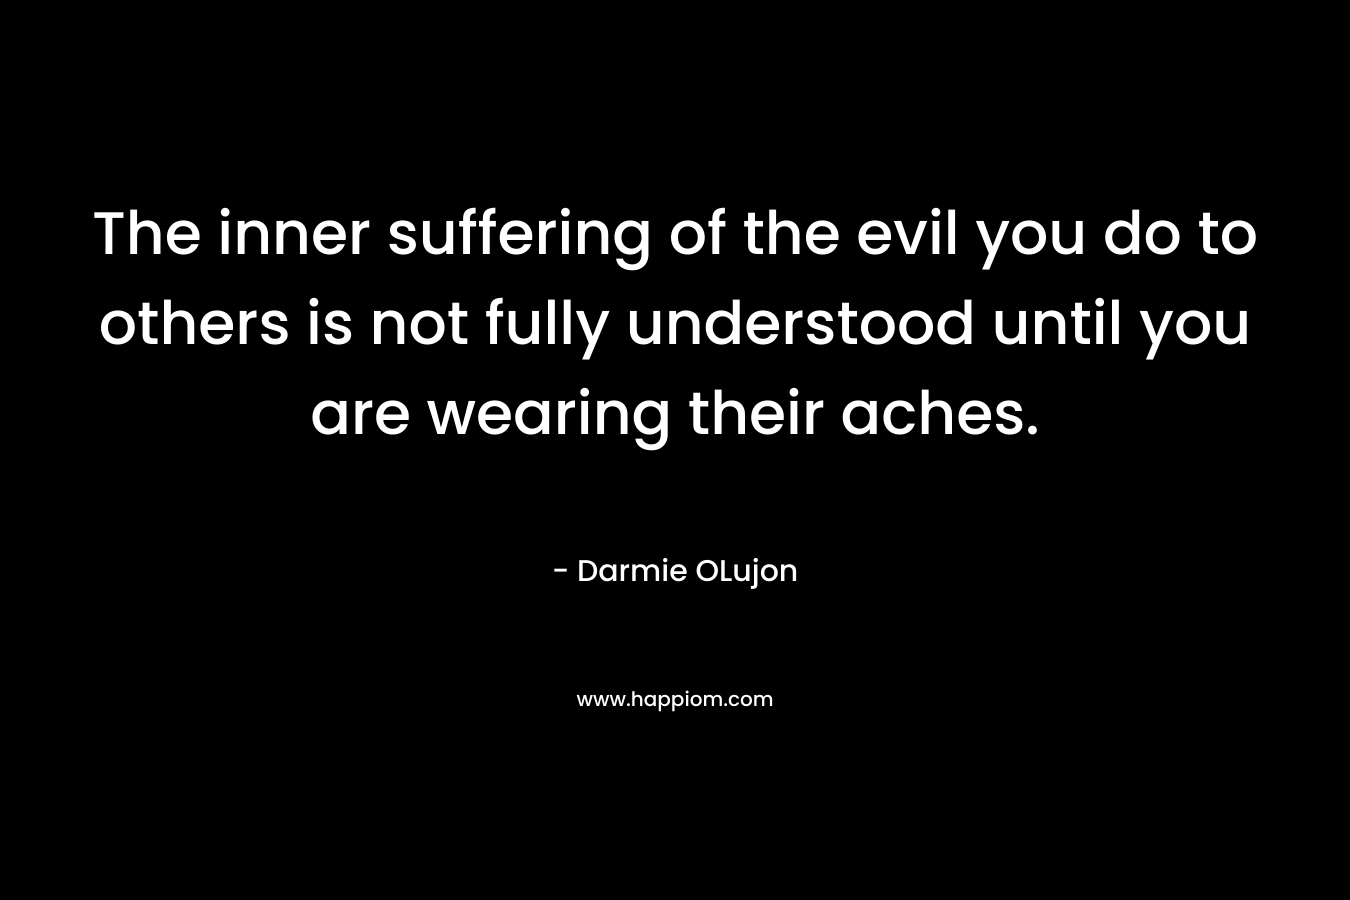 The inner suffering of the evil you do to others is not fully understood until you are wearing their aches.